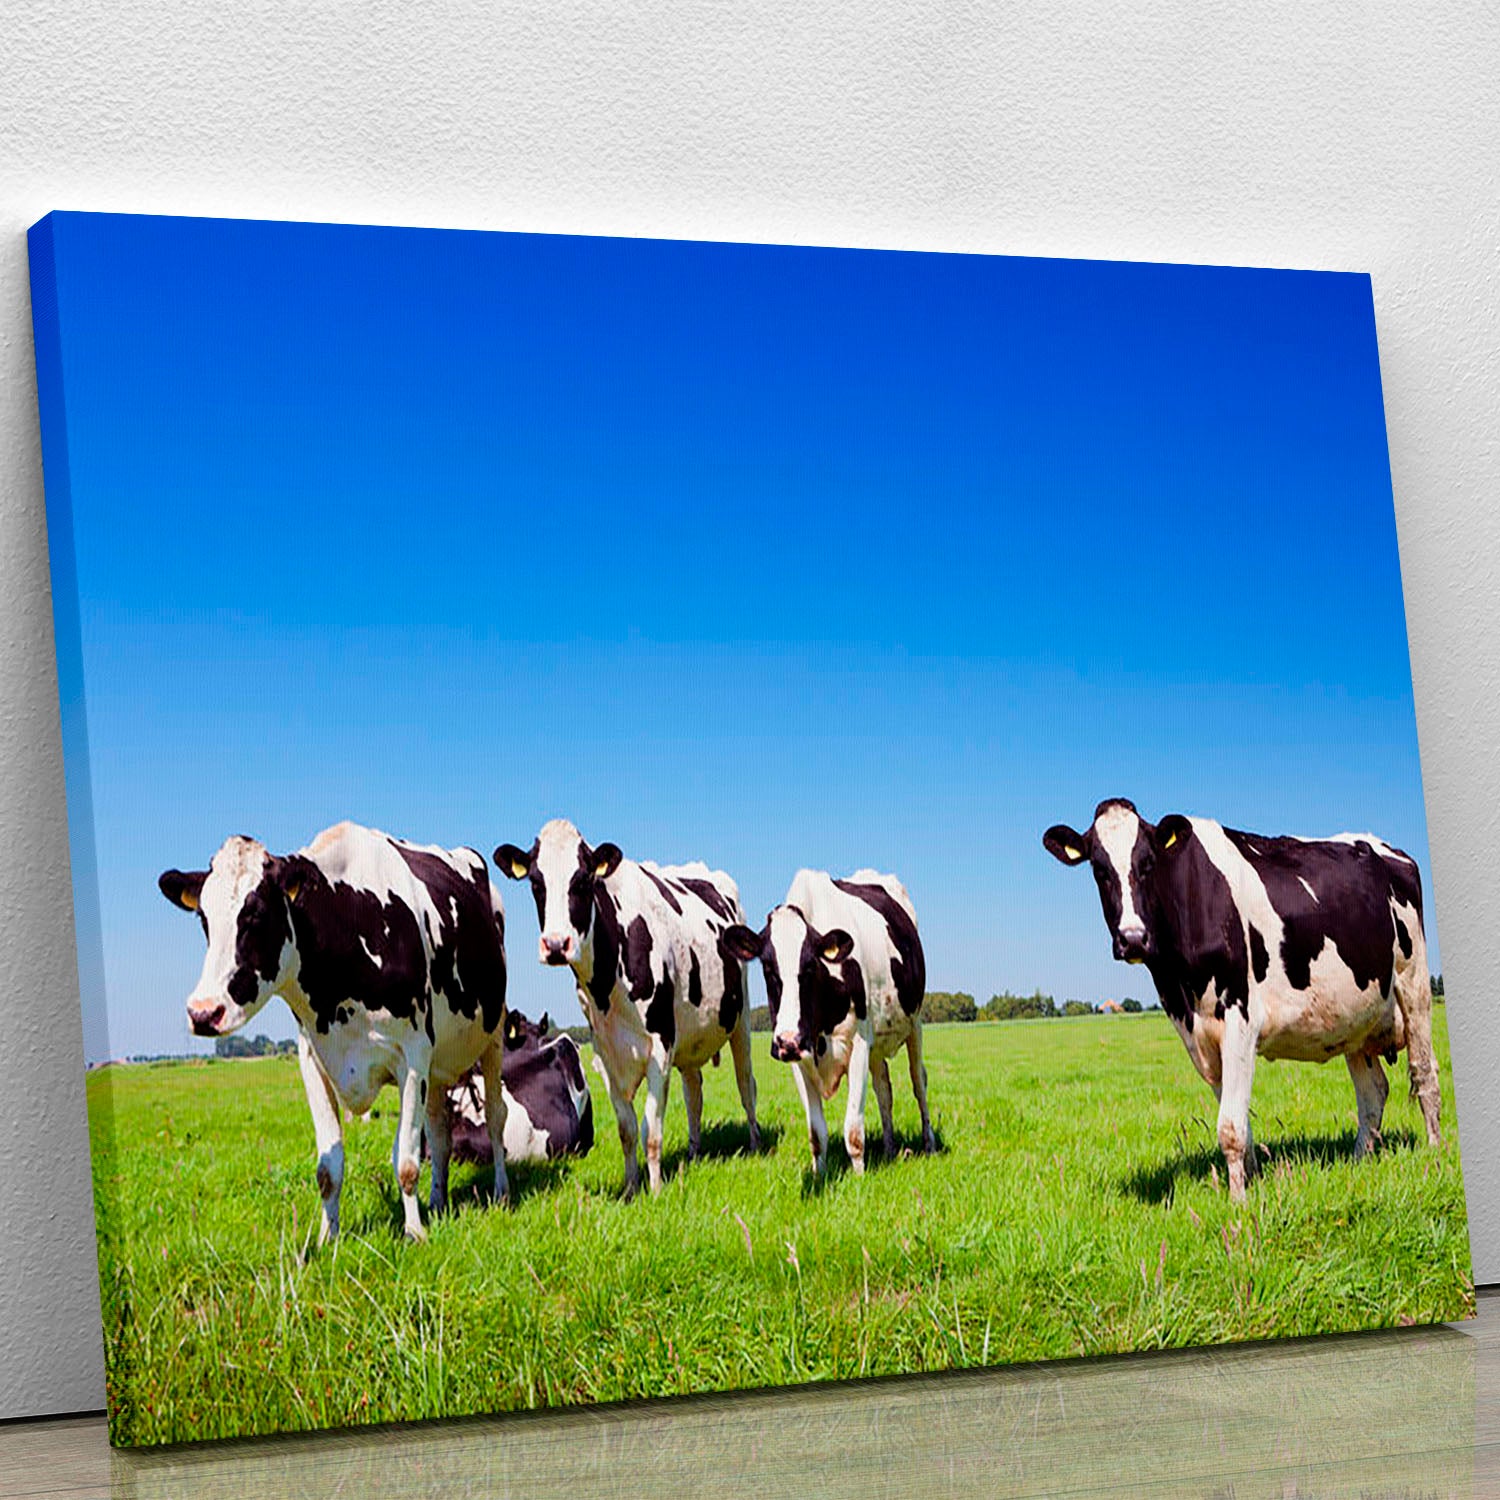 Black and white cows in a grassy field Canvas Print or Poster - Canvas Art Rocks - 1